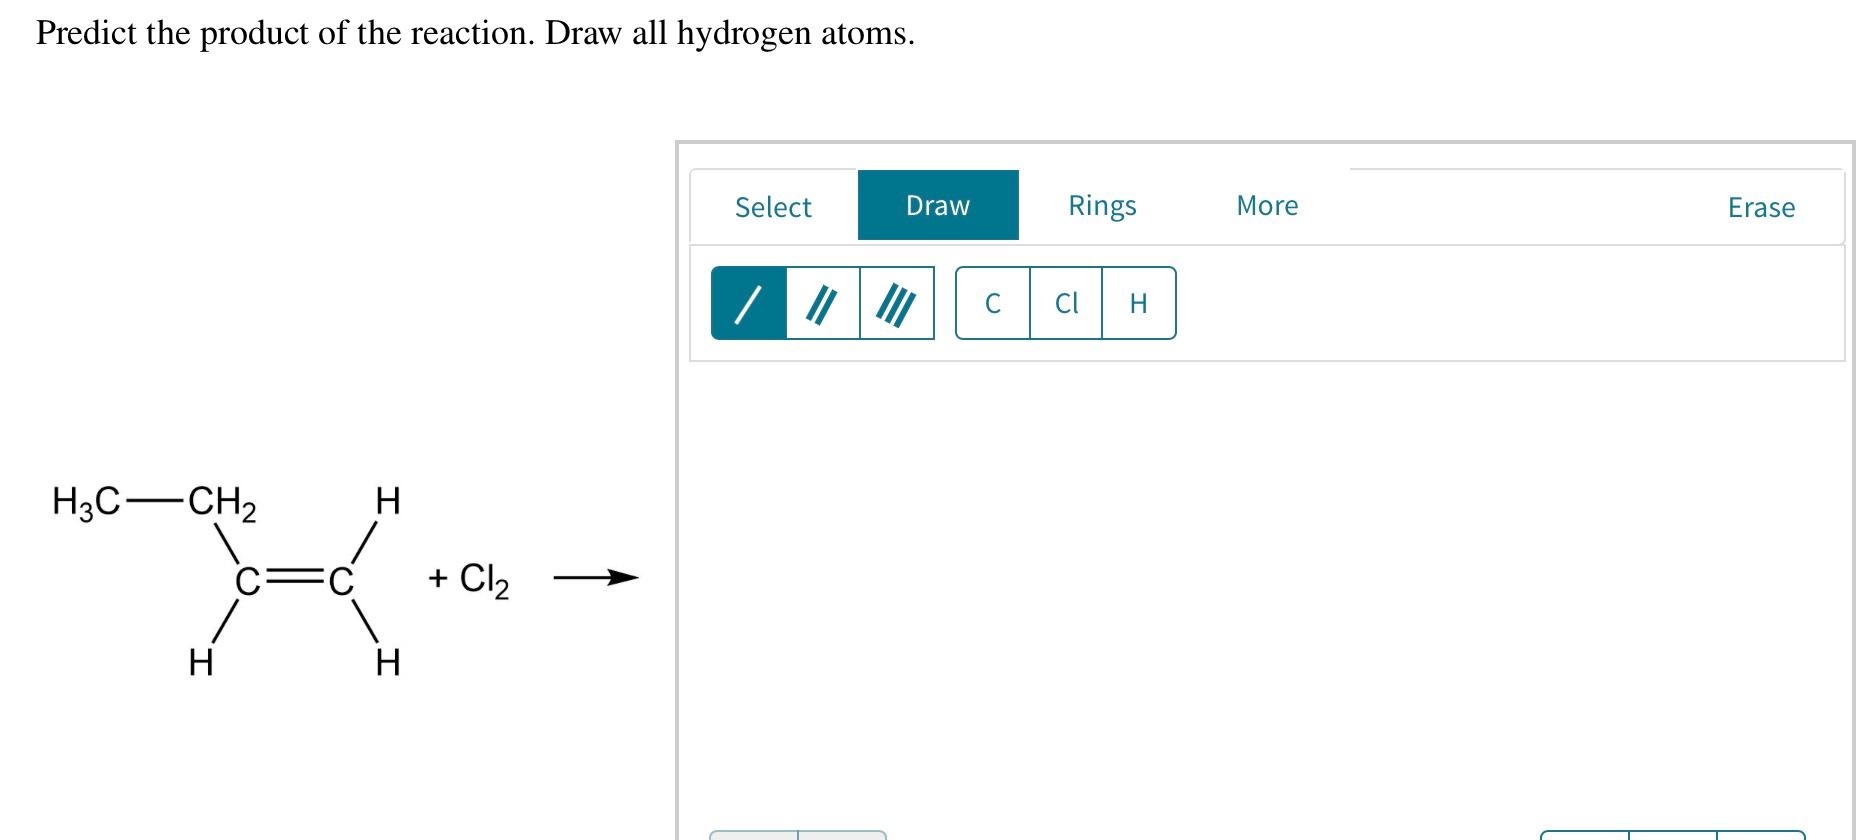 Predict the product of the reaction. Draw all hydrogen atoms.
Select
Draw
Rings
More
Erase
C с
Cl
H
H3C-CH2
H
+ Cl2
Н.
H